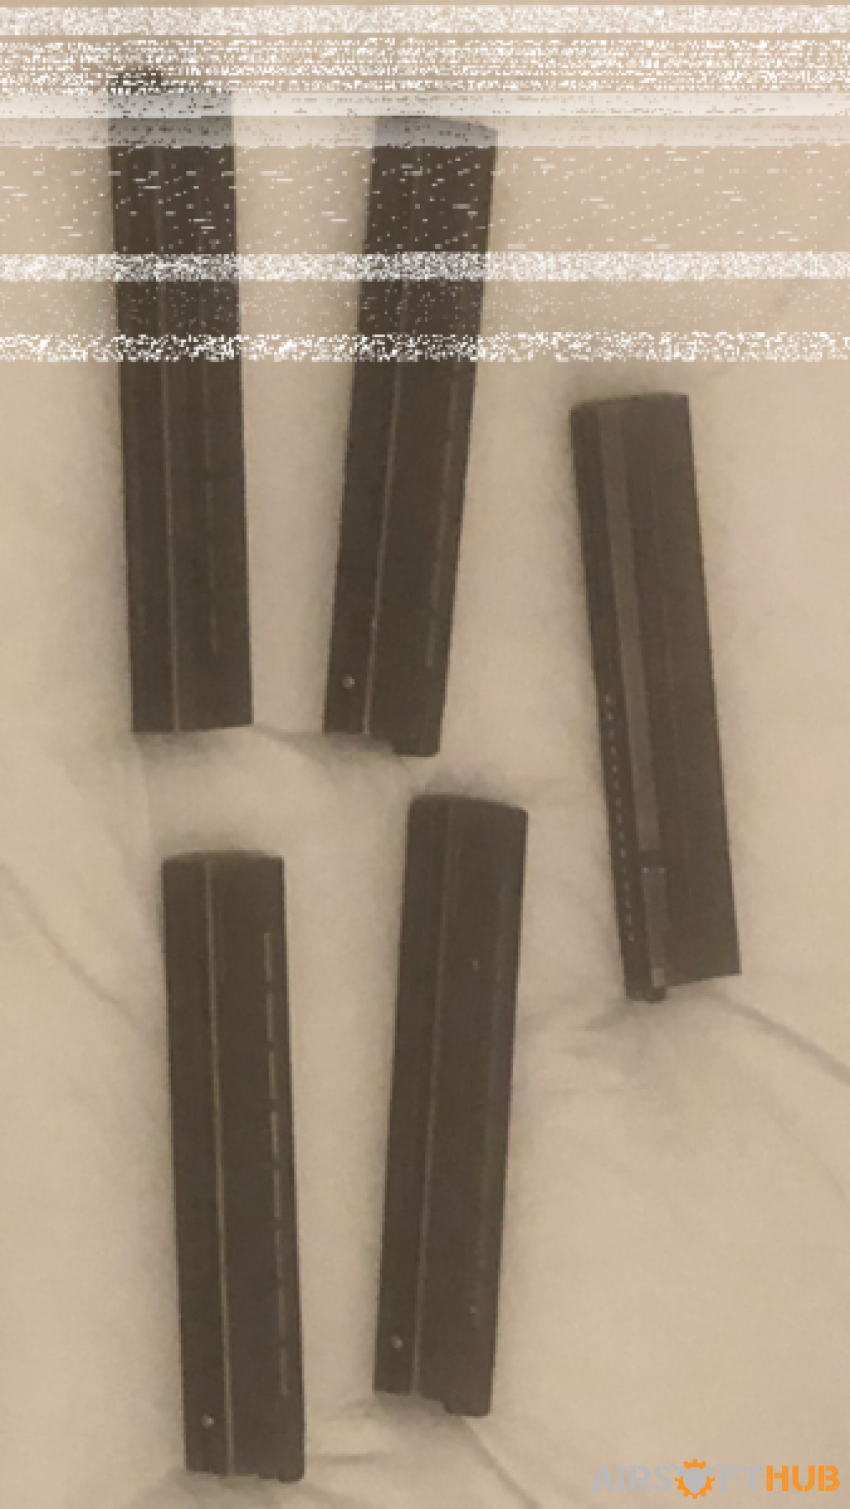 5 MP9 Gas Mags - Used airsoft equipment